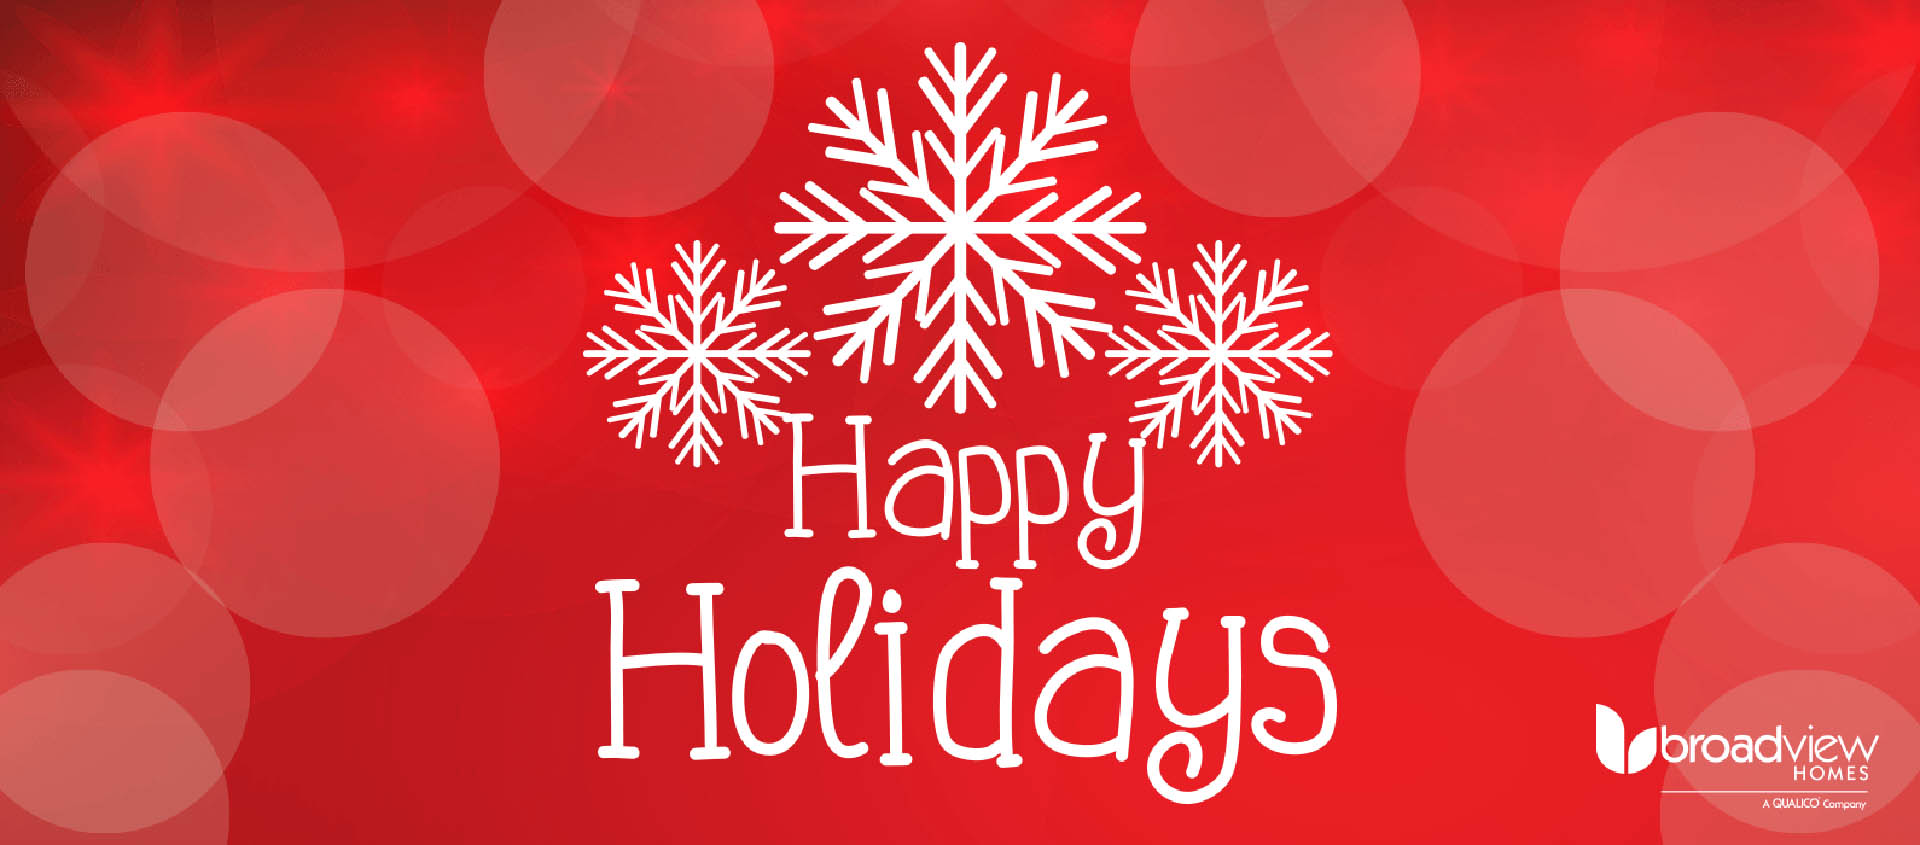 Happy Holidays from Broadview Homes! Featured Image